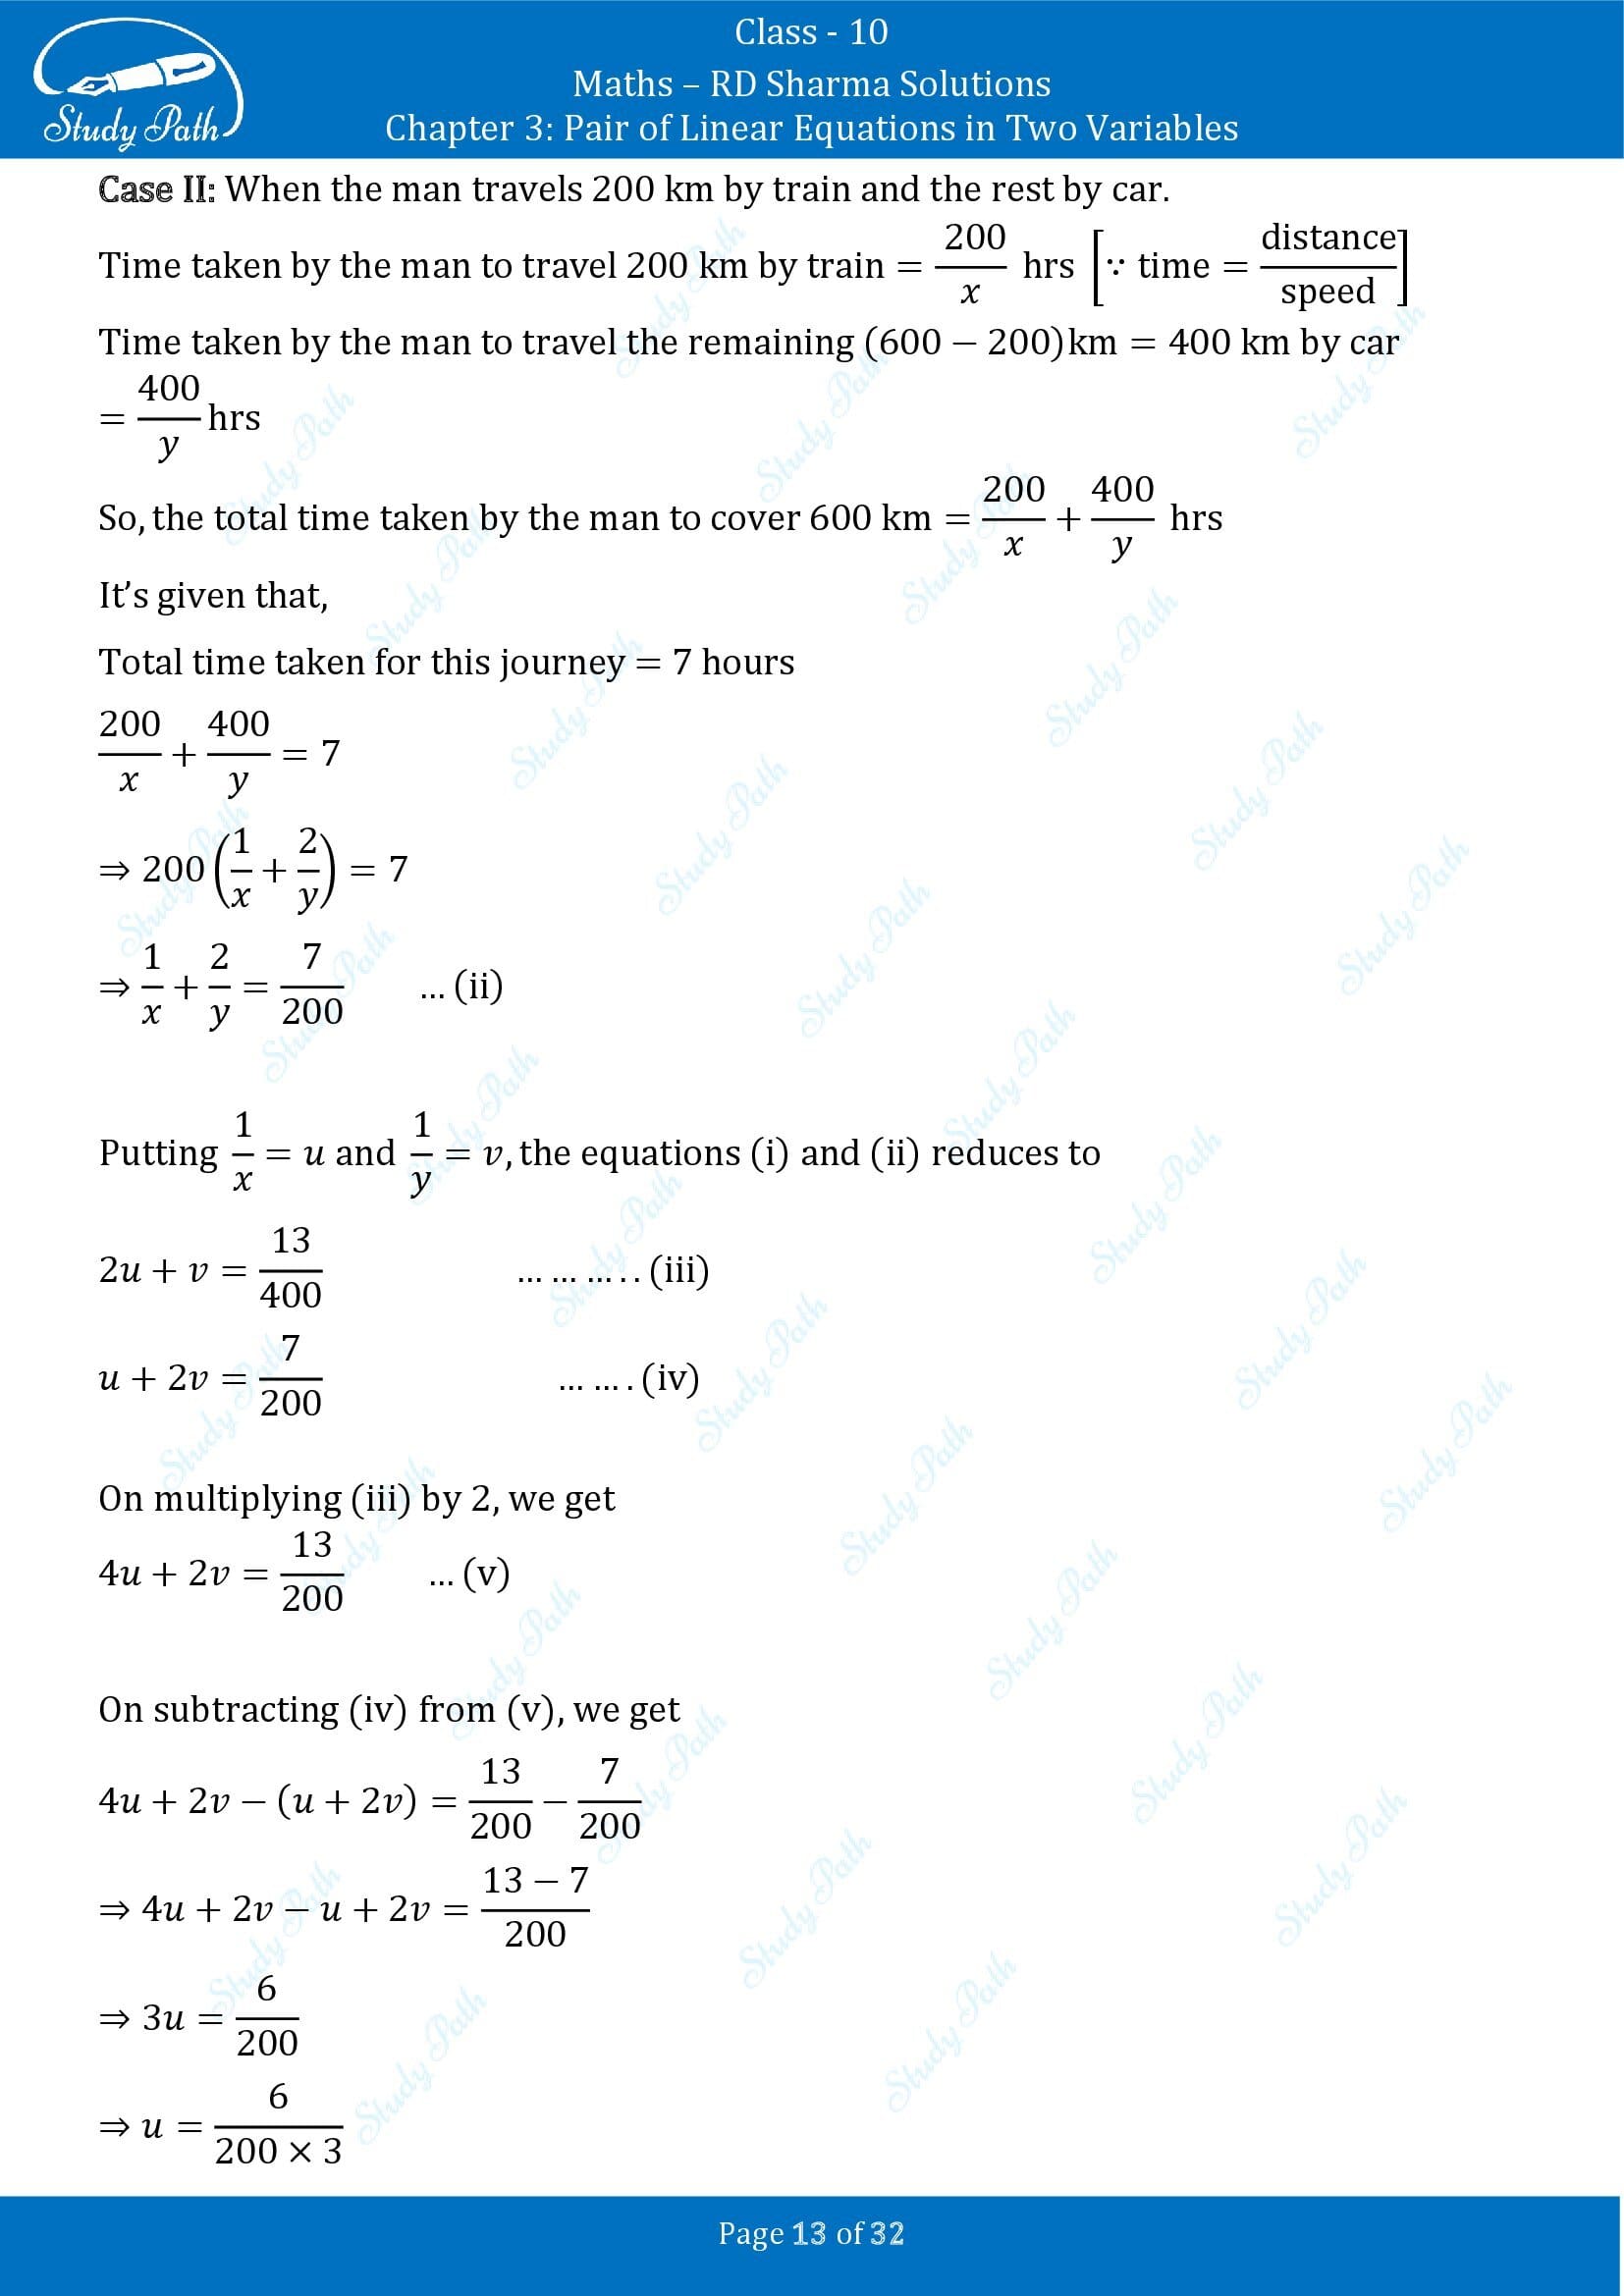 RD Sharma Solutions Class 10 Chapter 3 Pair of Linear Equations in Two Variables Exercise 3.10 00013